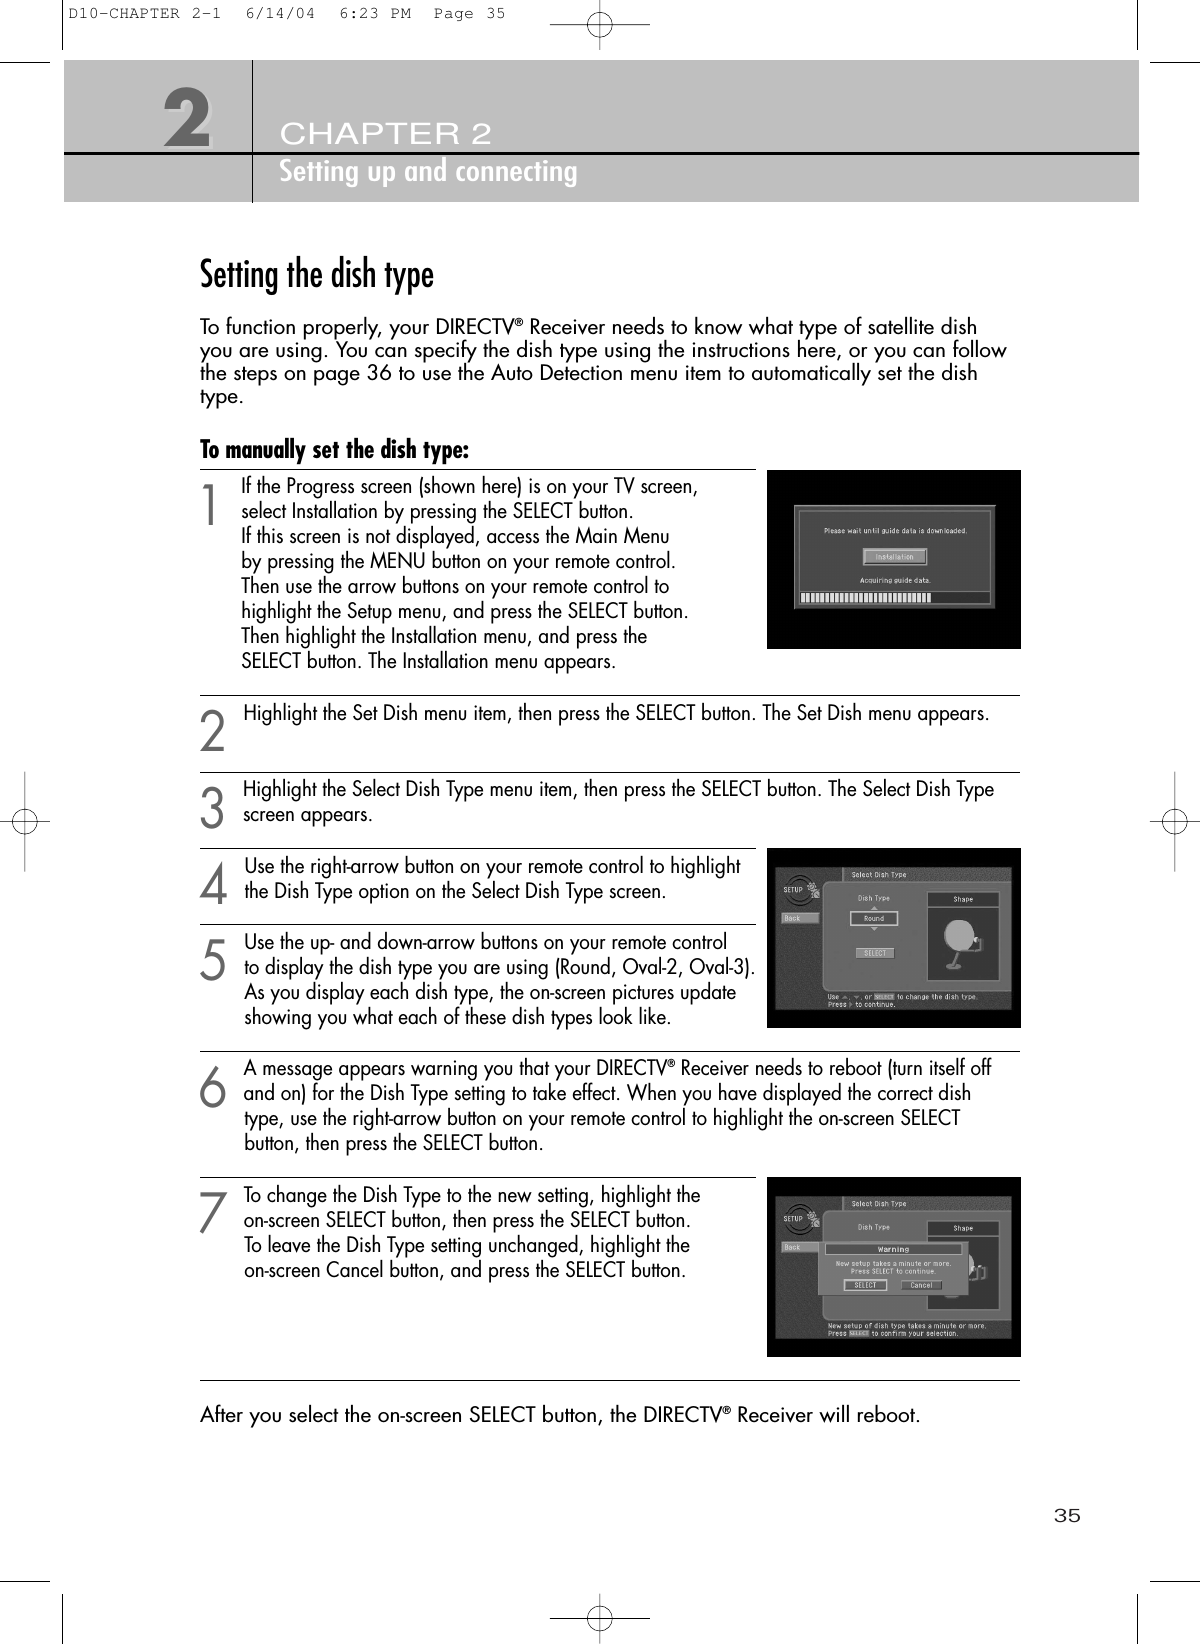 35CHAPTER 2Setting up and connecting22Setting the dish typeTo function properly, your DIRECTV®Receiver needs to know what type of satellite dish you are using. You can specify the dish type using the instructions here, or you can followthe steps on page 36 to use the Auto Detection menu item to automatically set the dishtype.To manually set the dish type:1If the Progress screen (shown here) is on your TV screen, select Installation by pressing the SELECT button. If this screen is not displayed, access the Main Menu by pressing the MENU button on your remote control. Then use the arrow buttons on your remote control to highlight the Setup menu, and press the SELECT button. Then highlight the Installation menu, and press the SELECT button. The Installation menu appears.2Highlight the Set Dish menu item, then press the SELECT button. The Set Dish menu appears.3Highlight the Select Dish Type menu item, then press the SELECT button. The Select Dish Typescreen appears.4Use the right-arrow button on your remote control to highlightthe Dish Type option on the Select Dish Type screen.5Use the up- and down-arrow buttons on your remote control to display the dish type you are using (Round, Oval-2, Oval-3).As you display each dish type, the on-screen pictures update showing you what each of these dish types look like.6A message appears warning you that your DIRECTV®Receiver needs to reboot (turn itself offand on) for the Dish Type setting to take effect. When you have displayed the correct dish type, use the right-arrow button on your remote control to highlight the on-screen SELECT button, then press the SELECT button.7To change the Dish Type to the new setting, highlight the on-screen SELECT button, then press the SELECT button. To leave the Dish Type setting unchanged, highlight the on-screen Cancel button, and press the SELECT button.After you select the on-screen SELECT button, the DIRECTV®Receiver will reboot. D10-CHAPTER 2-1  6/14/04  6:23 PM  Page 35